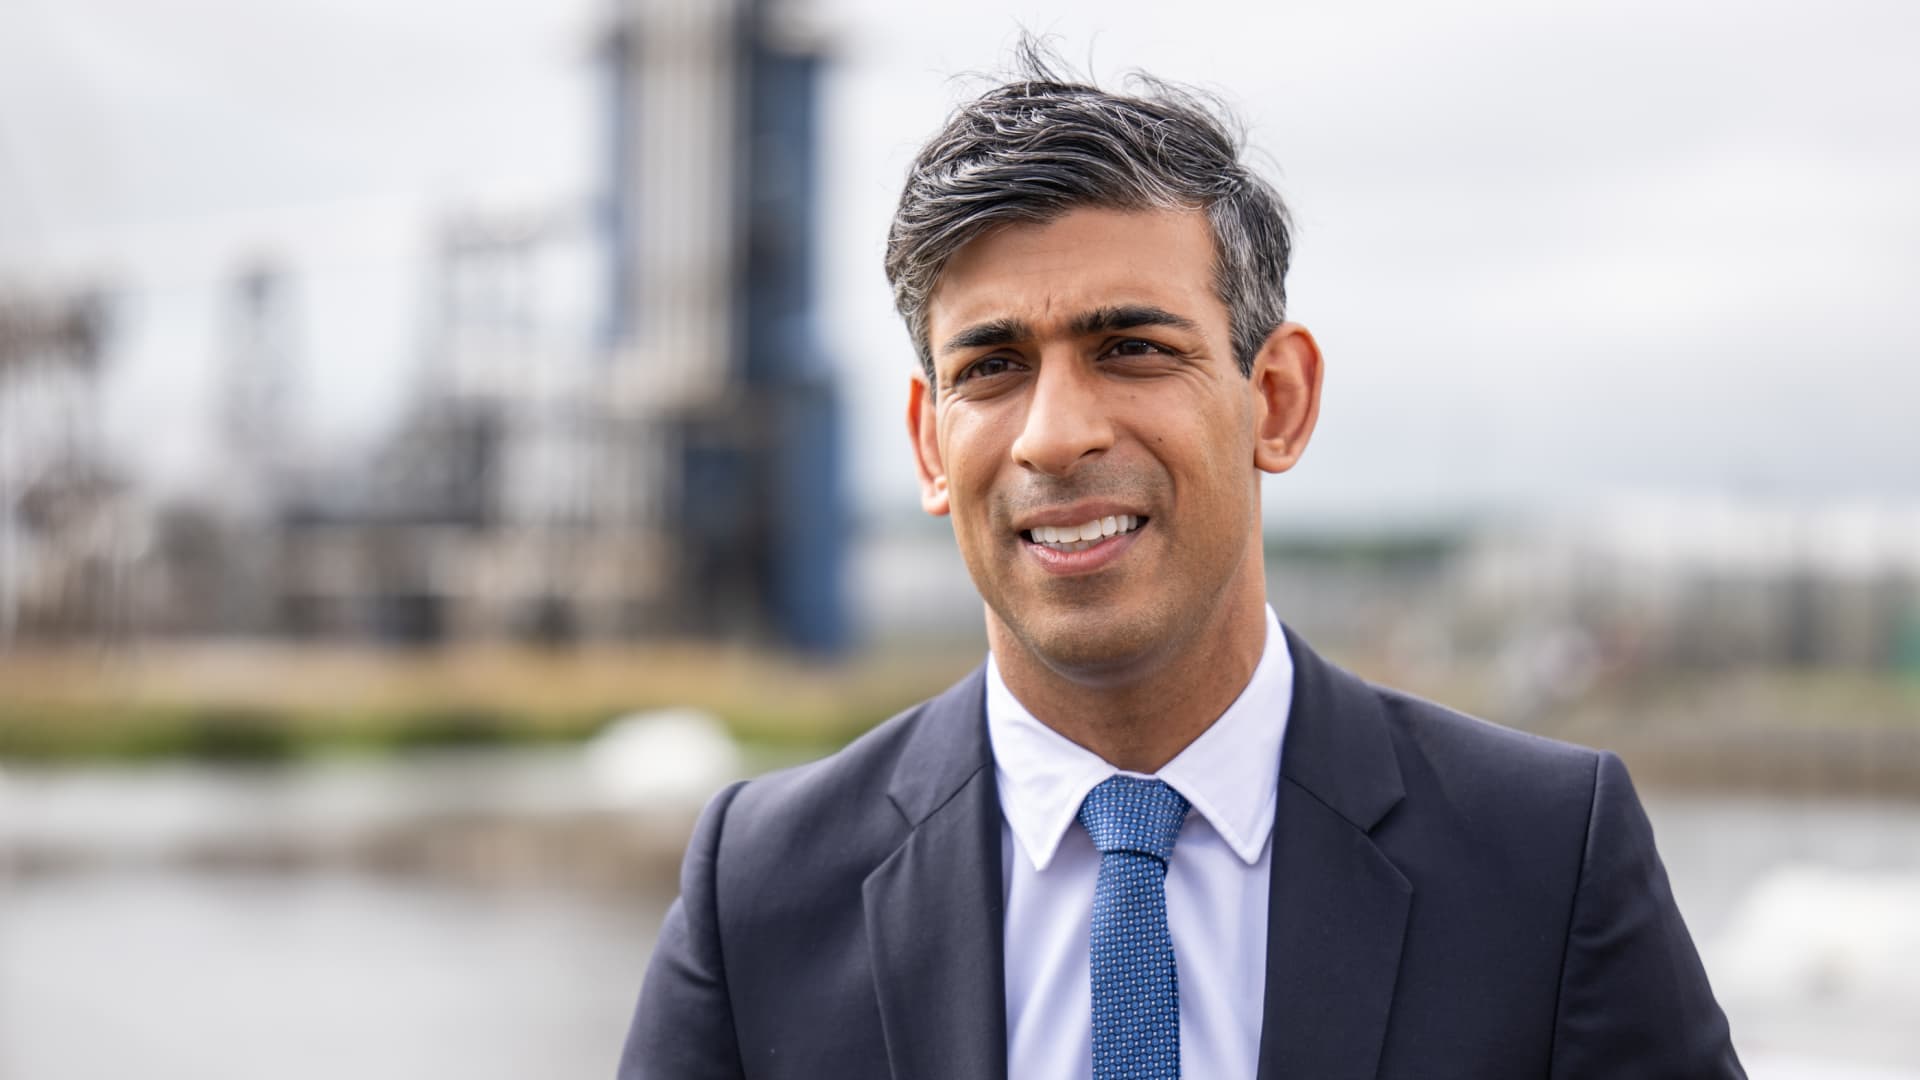 U.K. Prime Minister Rishi Sunak speaks to the media during his visit to Shell St Fergus Gas Plant in Peterhead on July 31, 2023 in Aberdeenshire, Scotland.